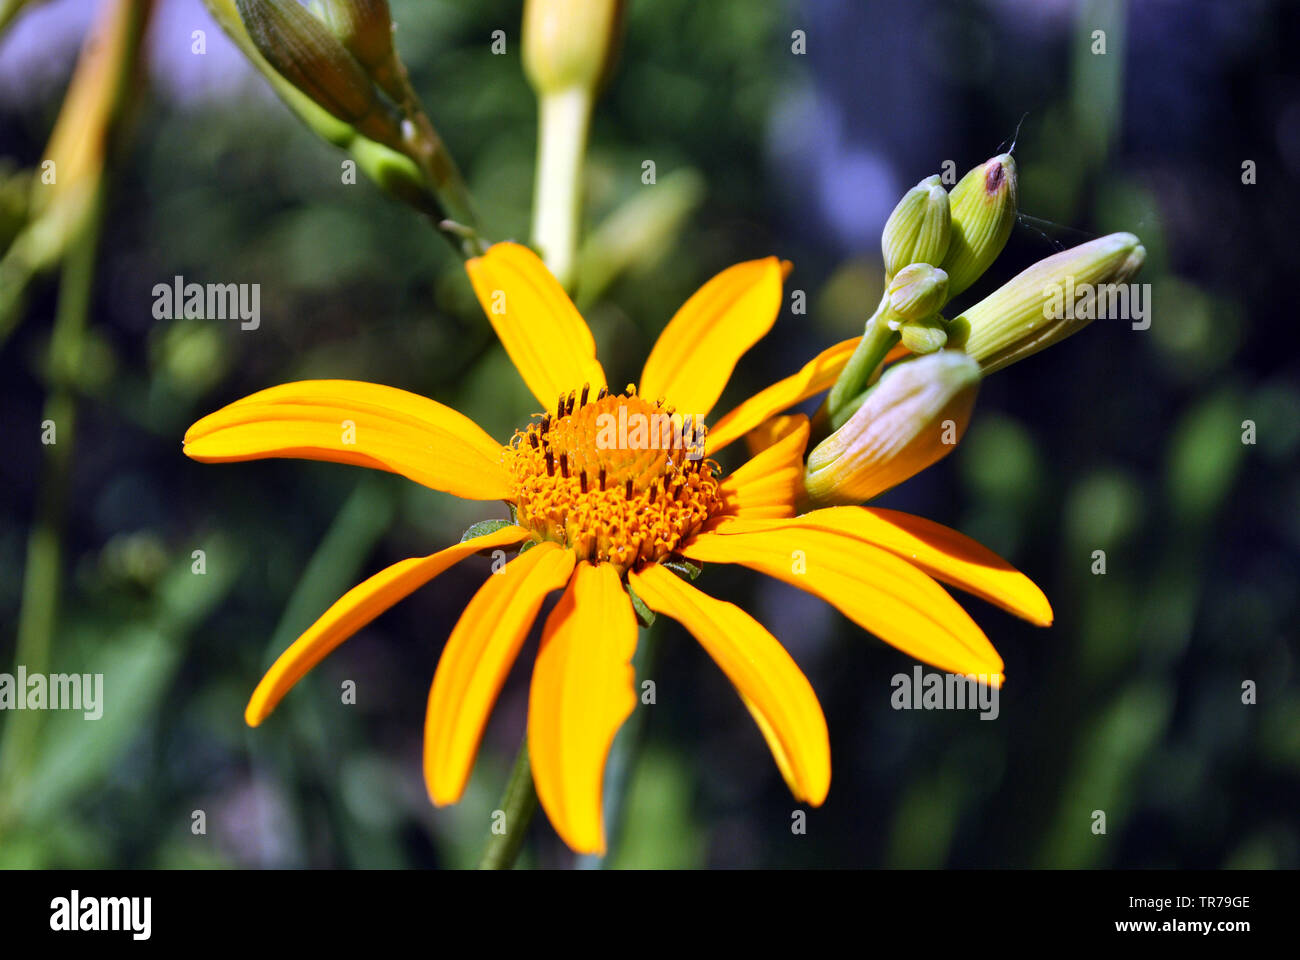 Doronicum plantagineum (the plantain-leaved leopard's-bane or plantain false leopardbane) blooming flower and buds on blurry grass background Stock Photo